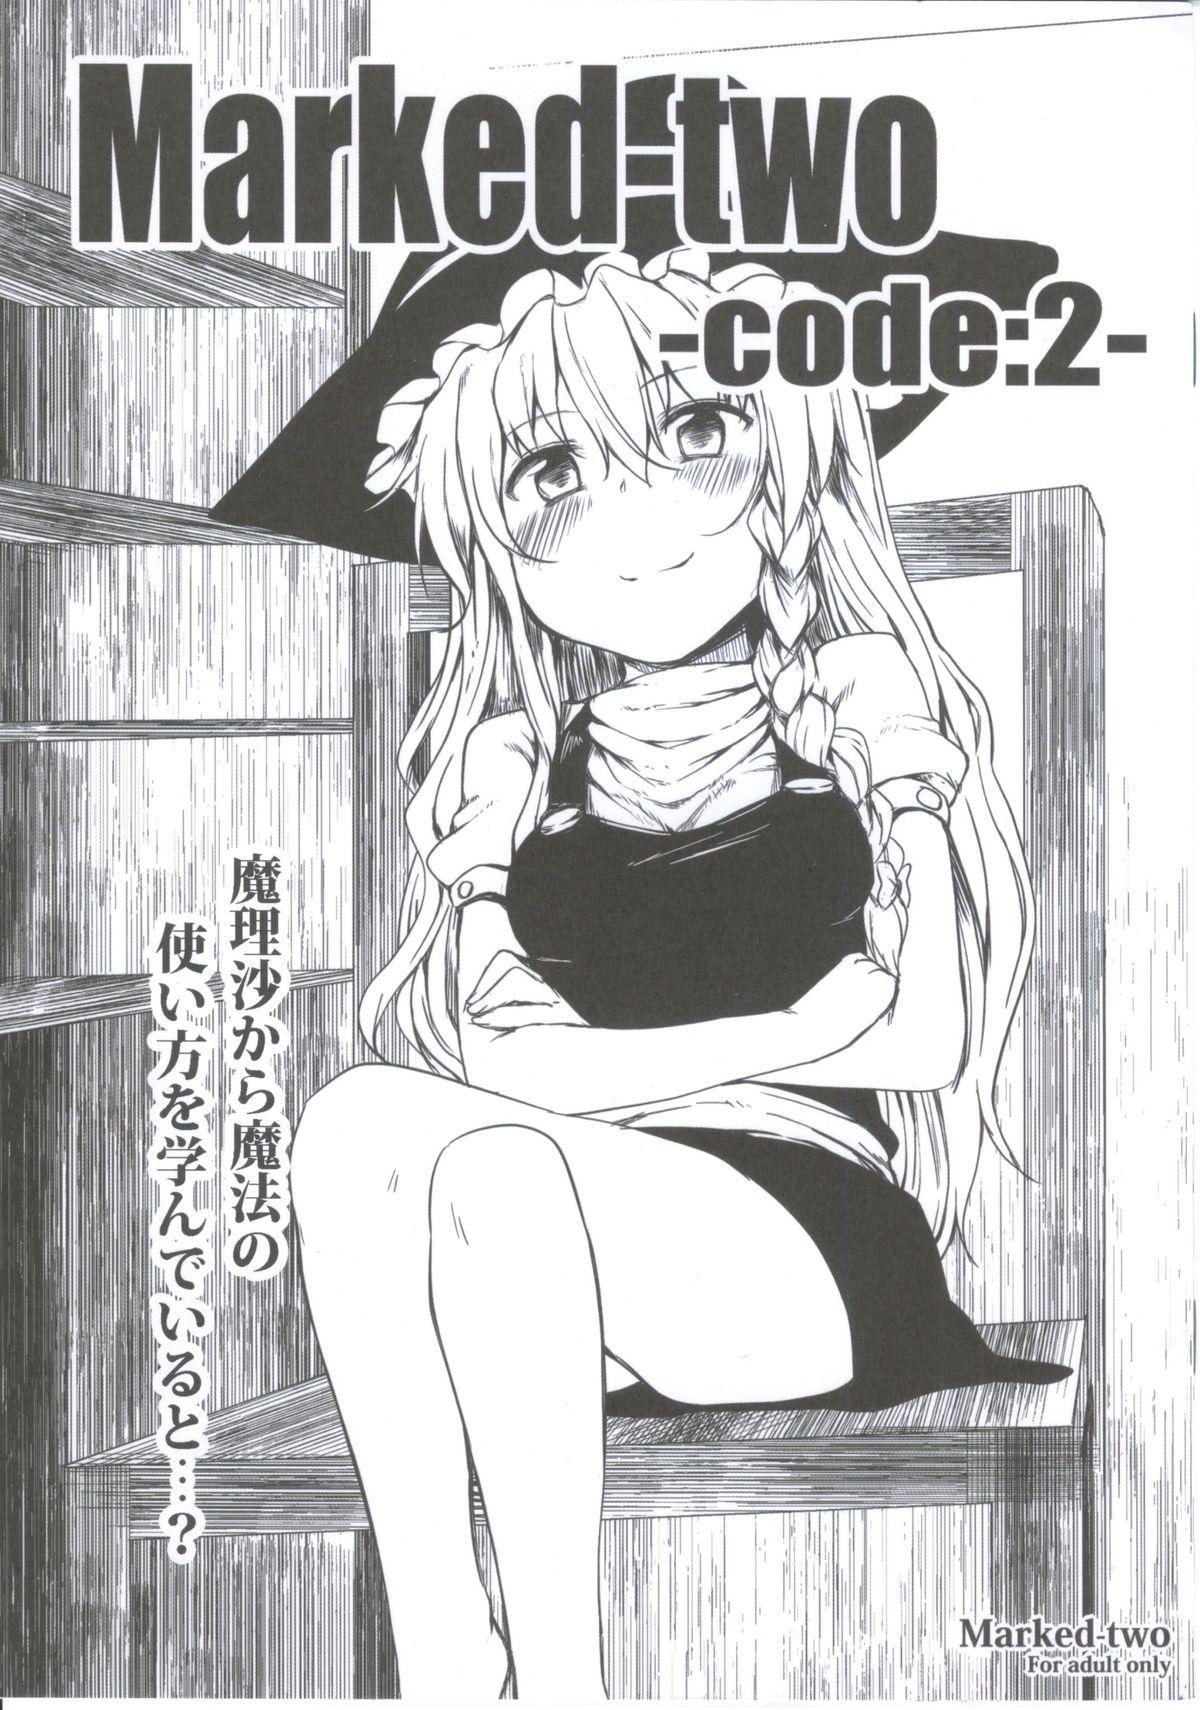 [Marked-two] Marked-two -code:2- (東方Project) 0